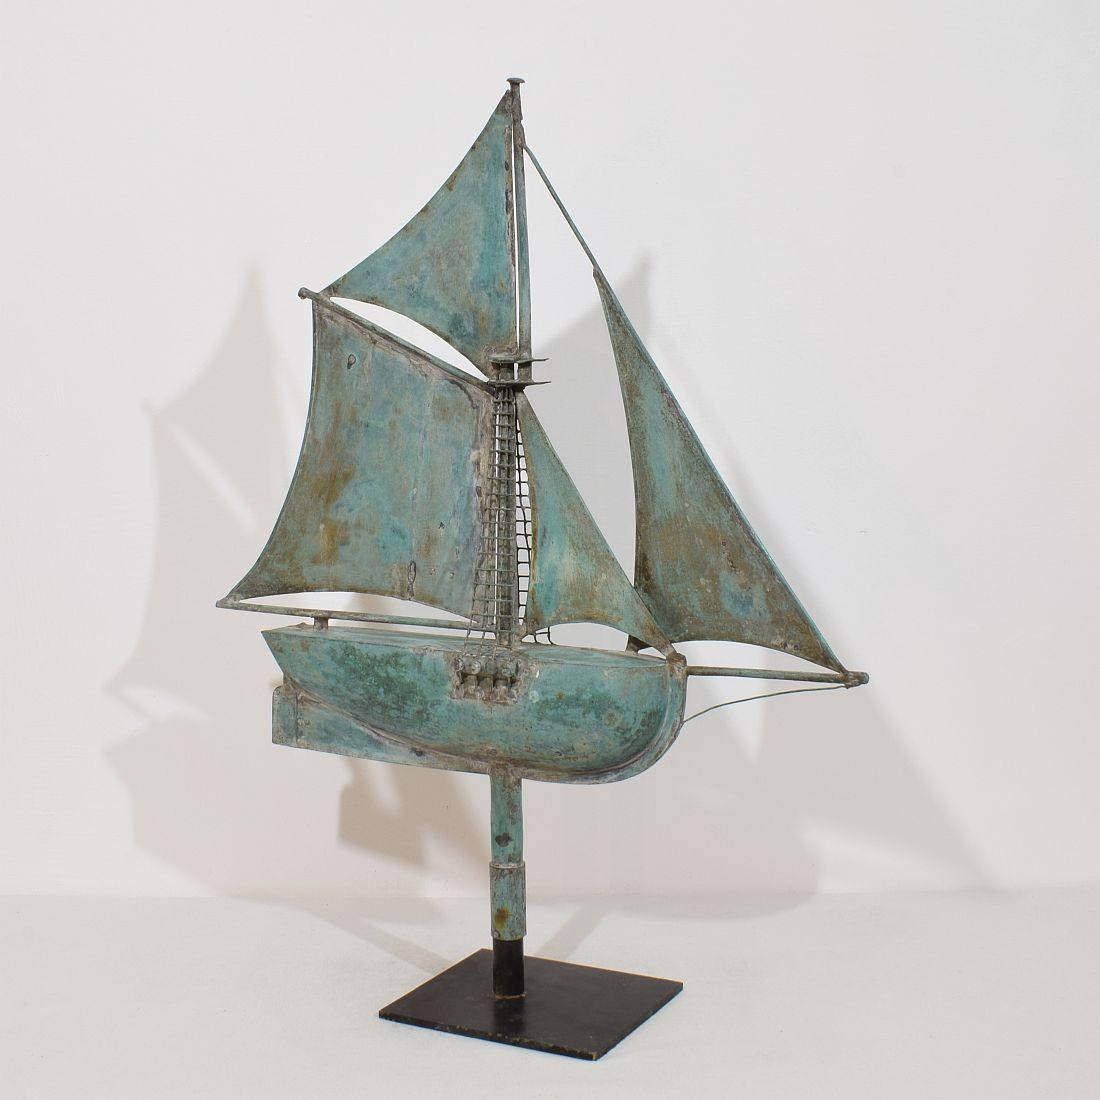 Wonderful and rare folk art copper sailboat weather-vane . A real unique find with gorgeous vert de gris patine.
France, circa 1880-1900. 
Weathered , small losses and old repairs.
Placed on metal stand . measurements include the stand.
More photo's